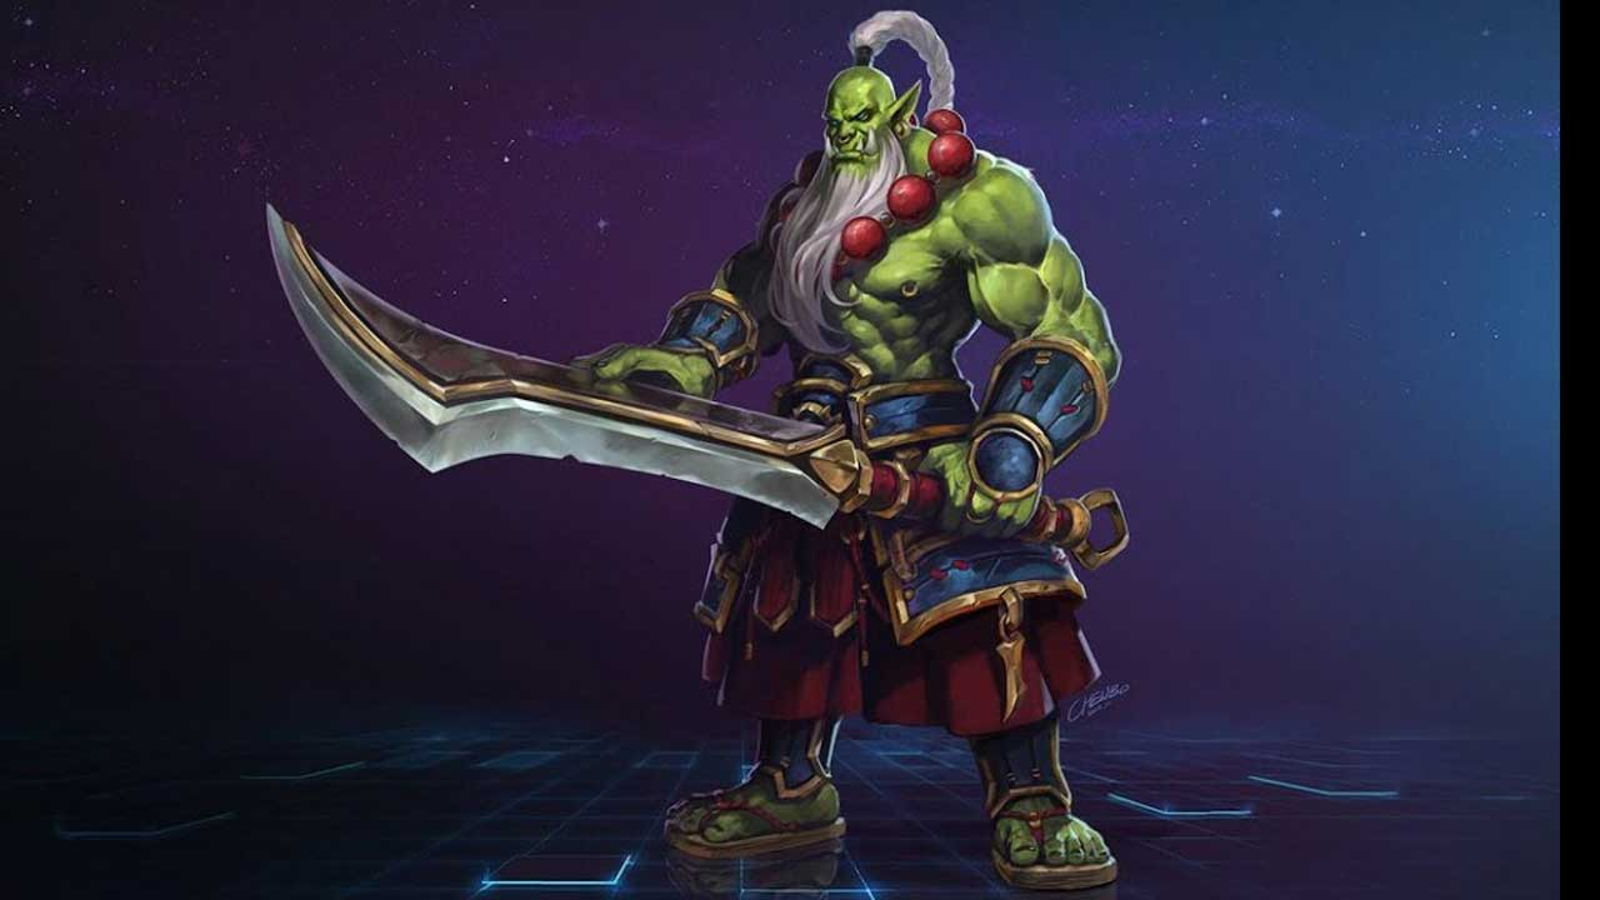 Get 20 Free Heroes Of The Storm Characters Starting Next Week - GameSpot